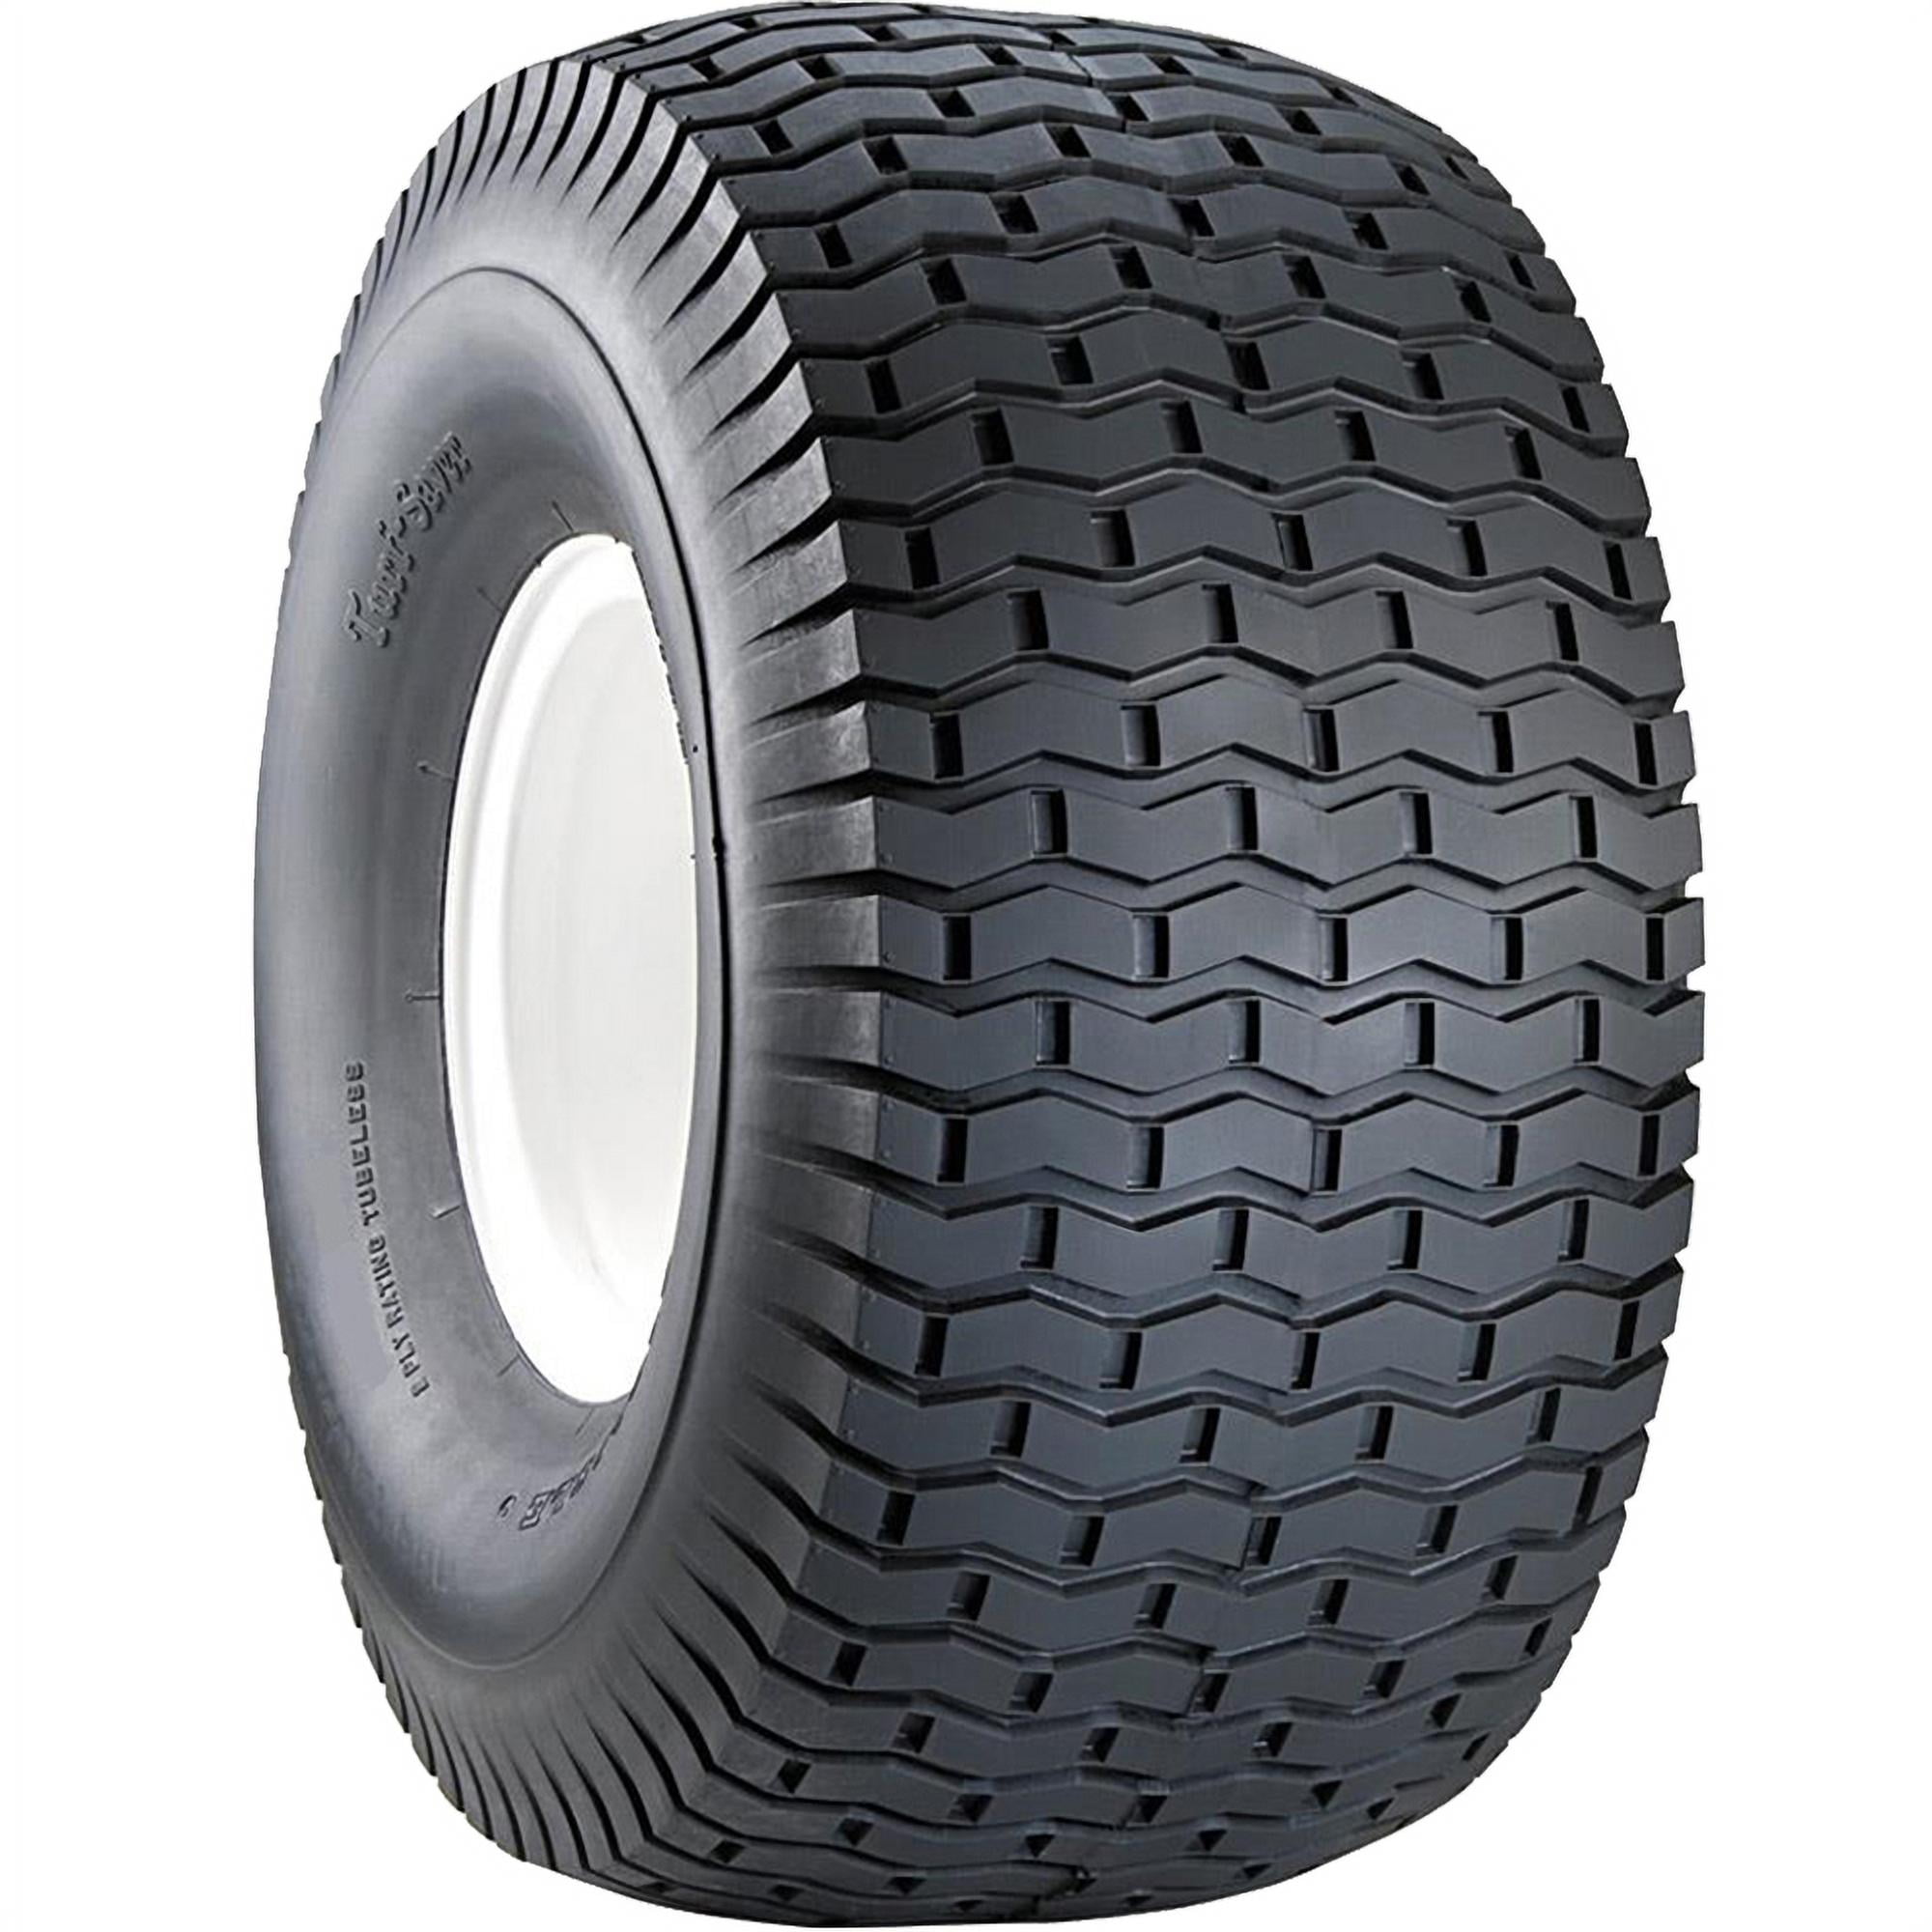 Details about   Oregon 68-211 4-ply Tubeless Tire 